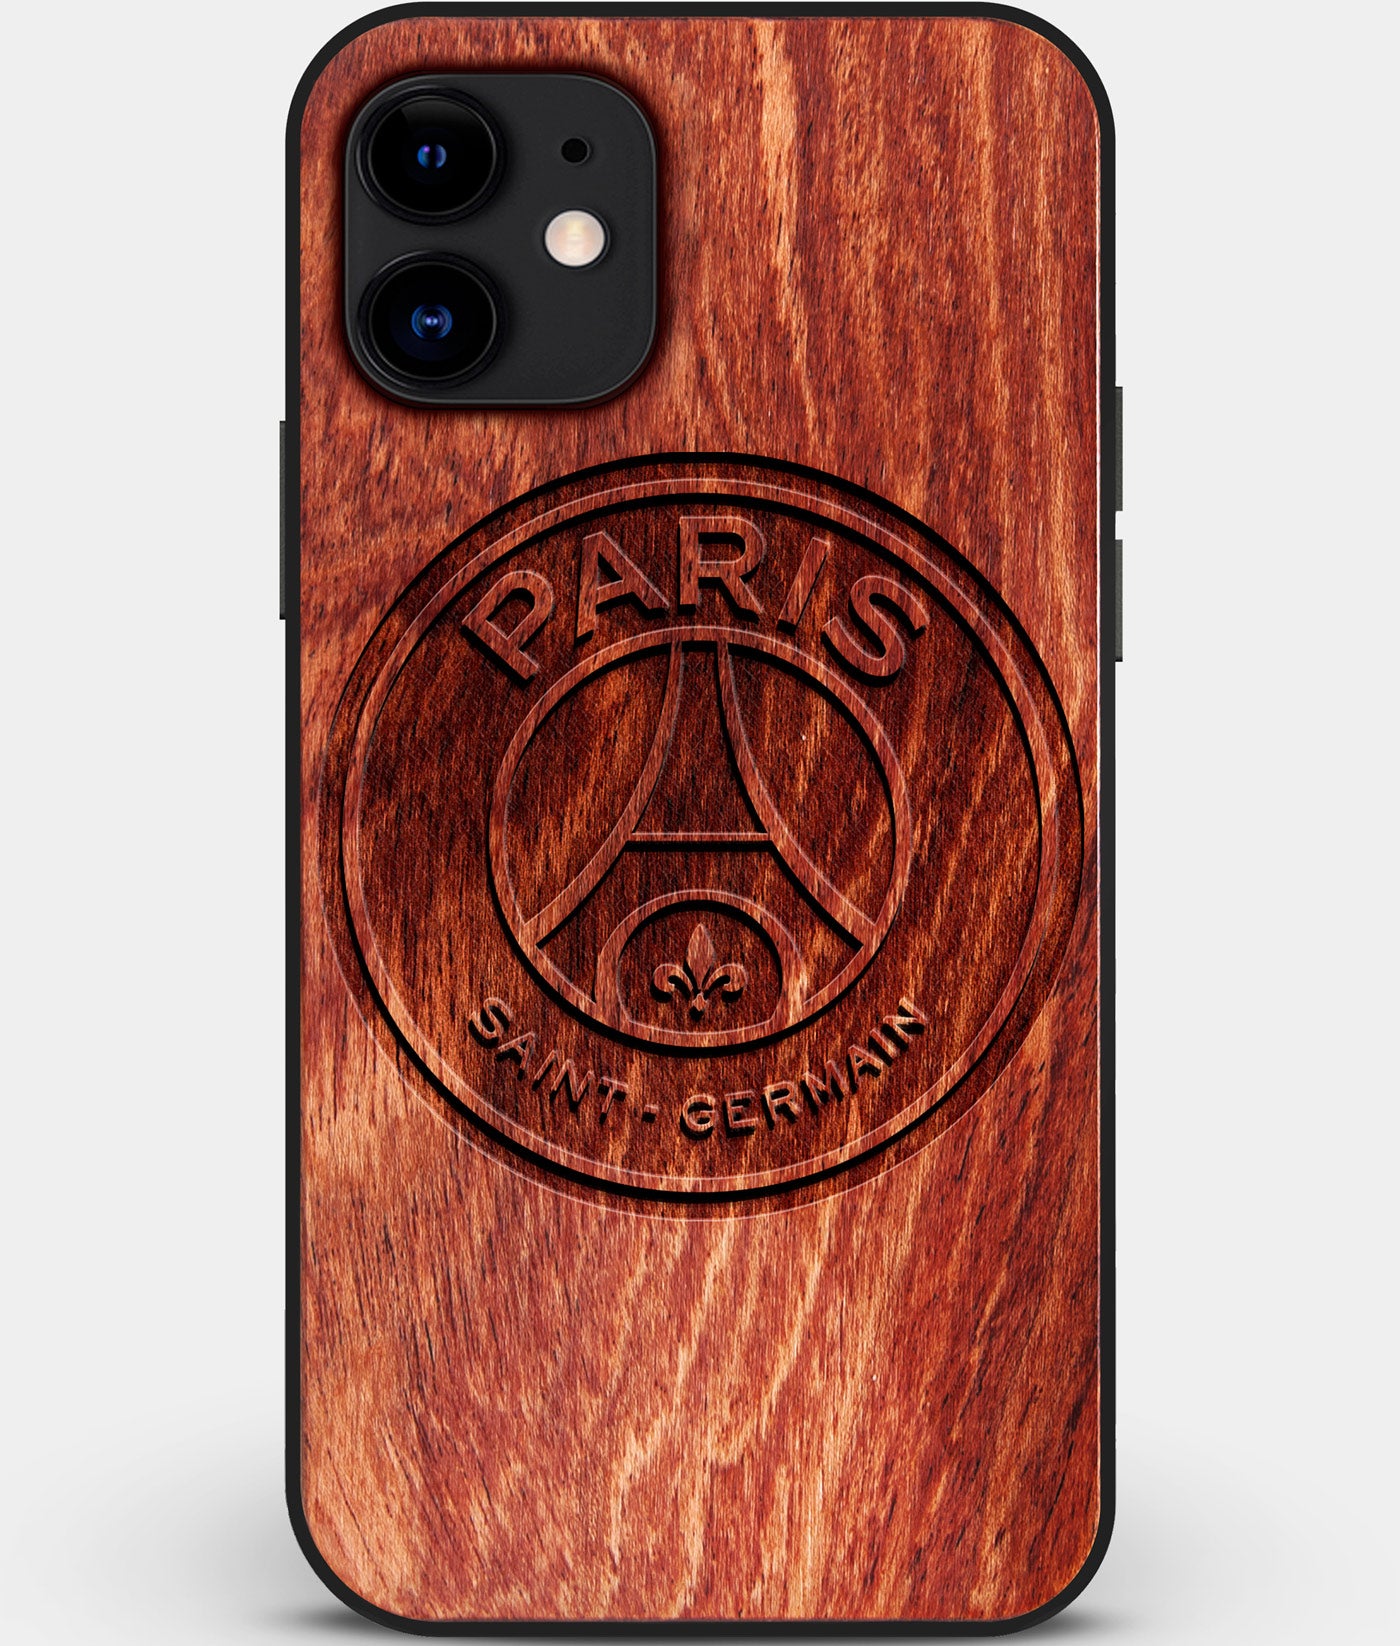 Custom Carved Wood Paris Saint Germain F.C. iPhone 12 Mini Case | Personalized Mahogany Wood Paris Saint Germain F.C. Cover, Birthday Gift, Gifts For Him, Monogrammed Gift For Fan | by Engraved In Nature